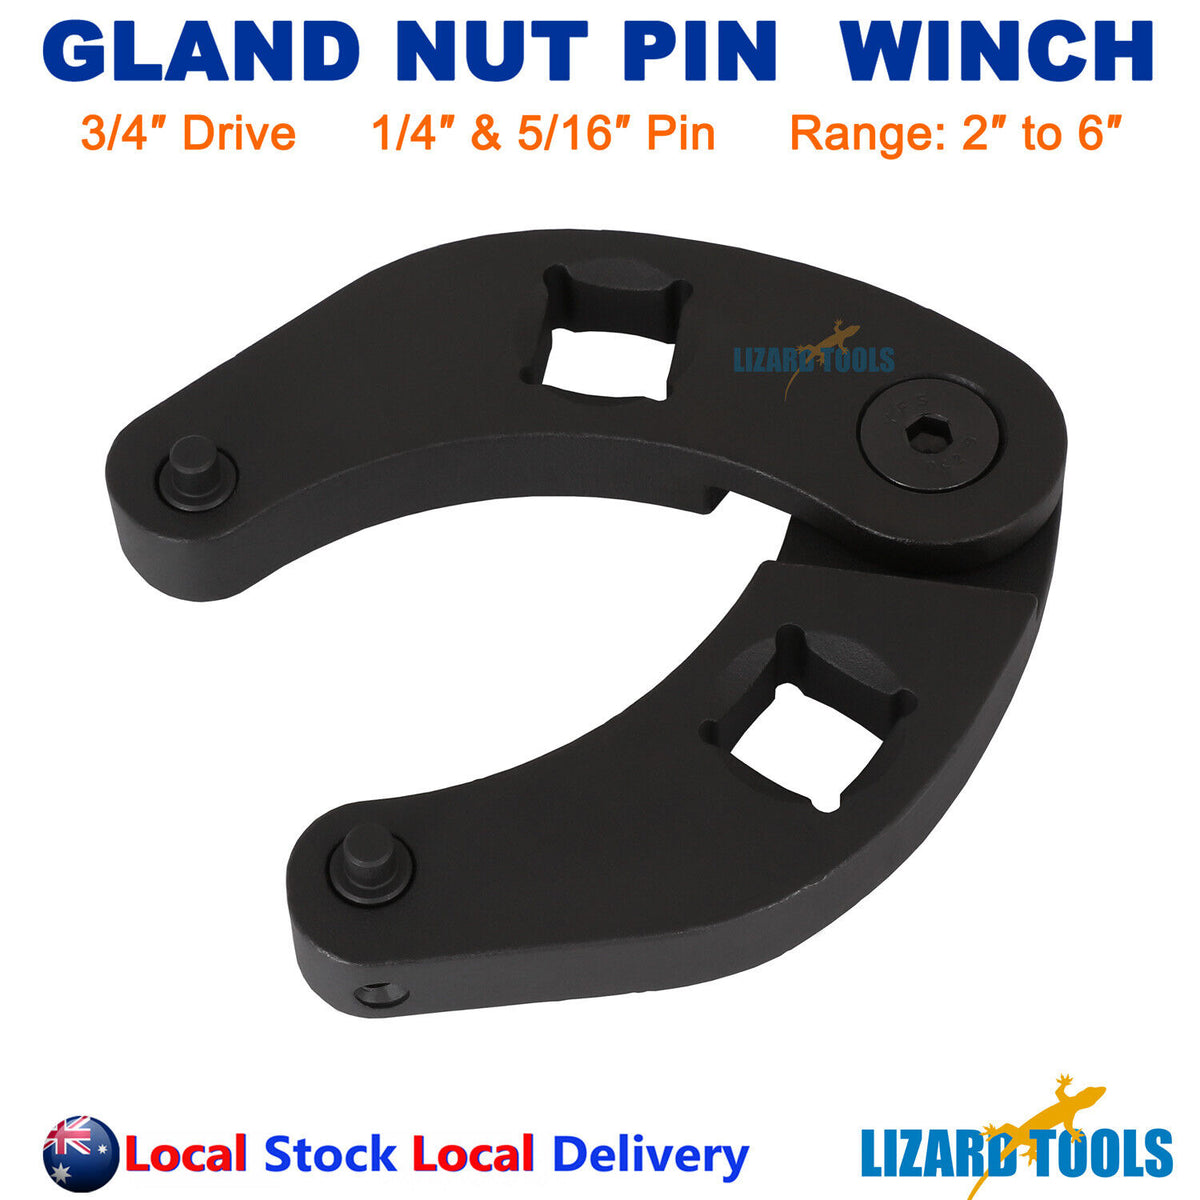 APT Taiwan Gland Nut Wrench Pin Spanner 3/4 Drive 1/4 & 5/16 Pin 51mm - 152mm